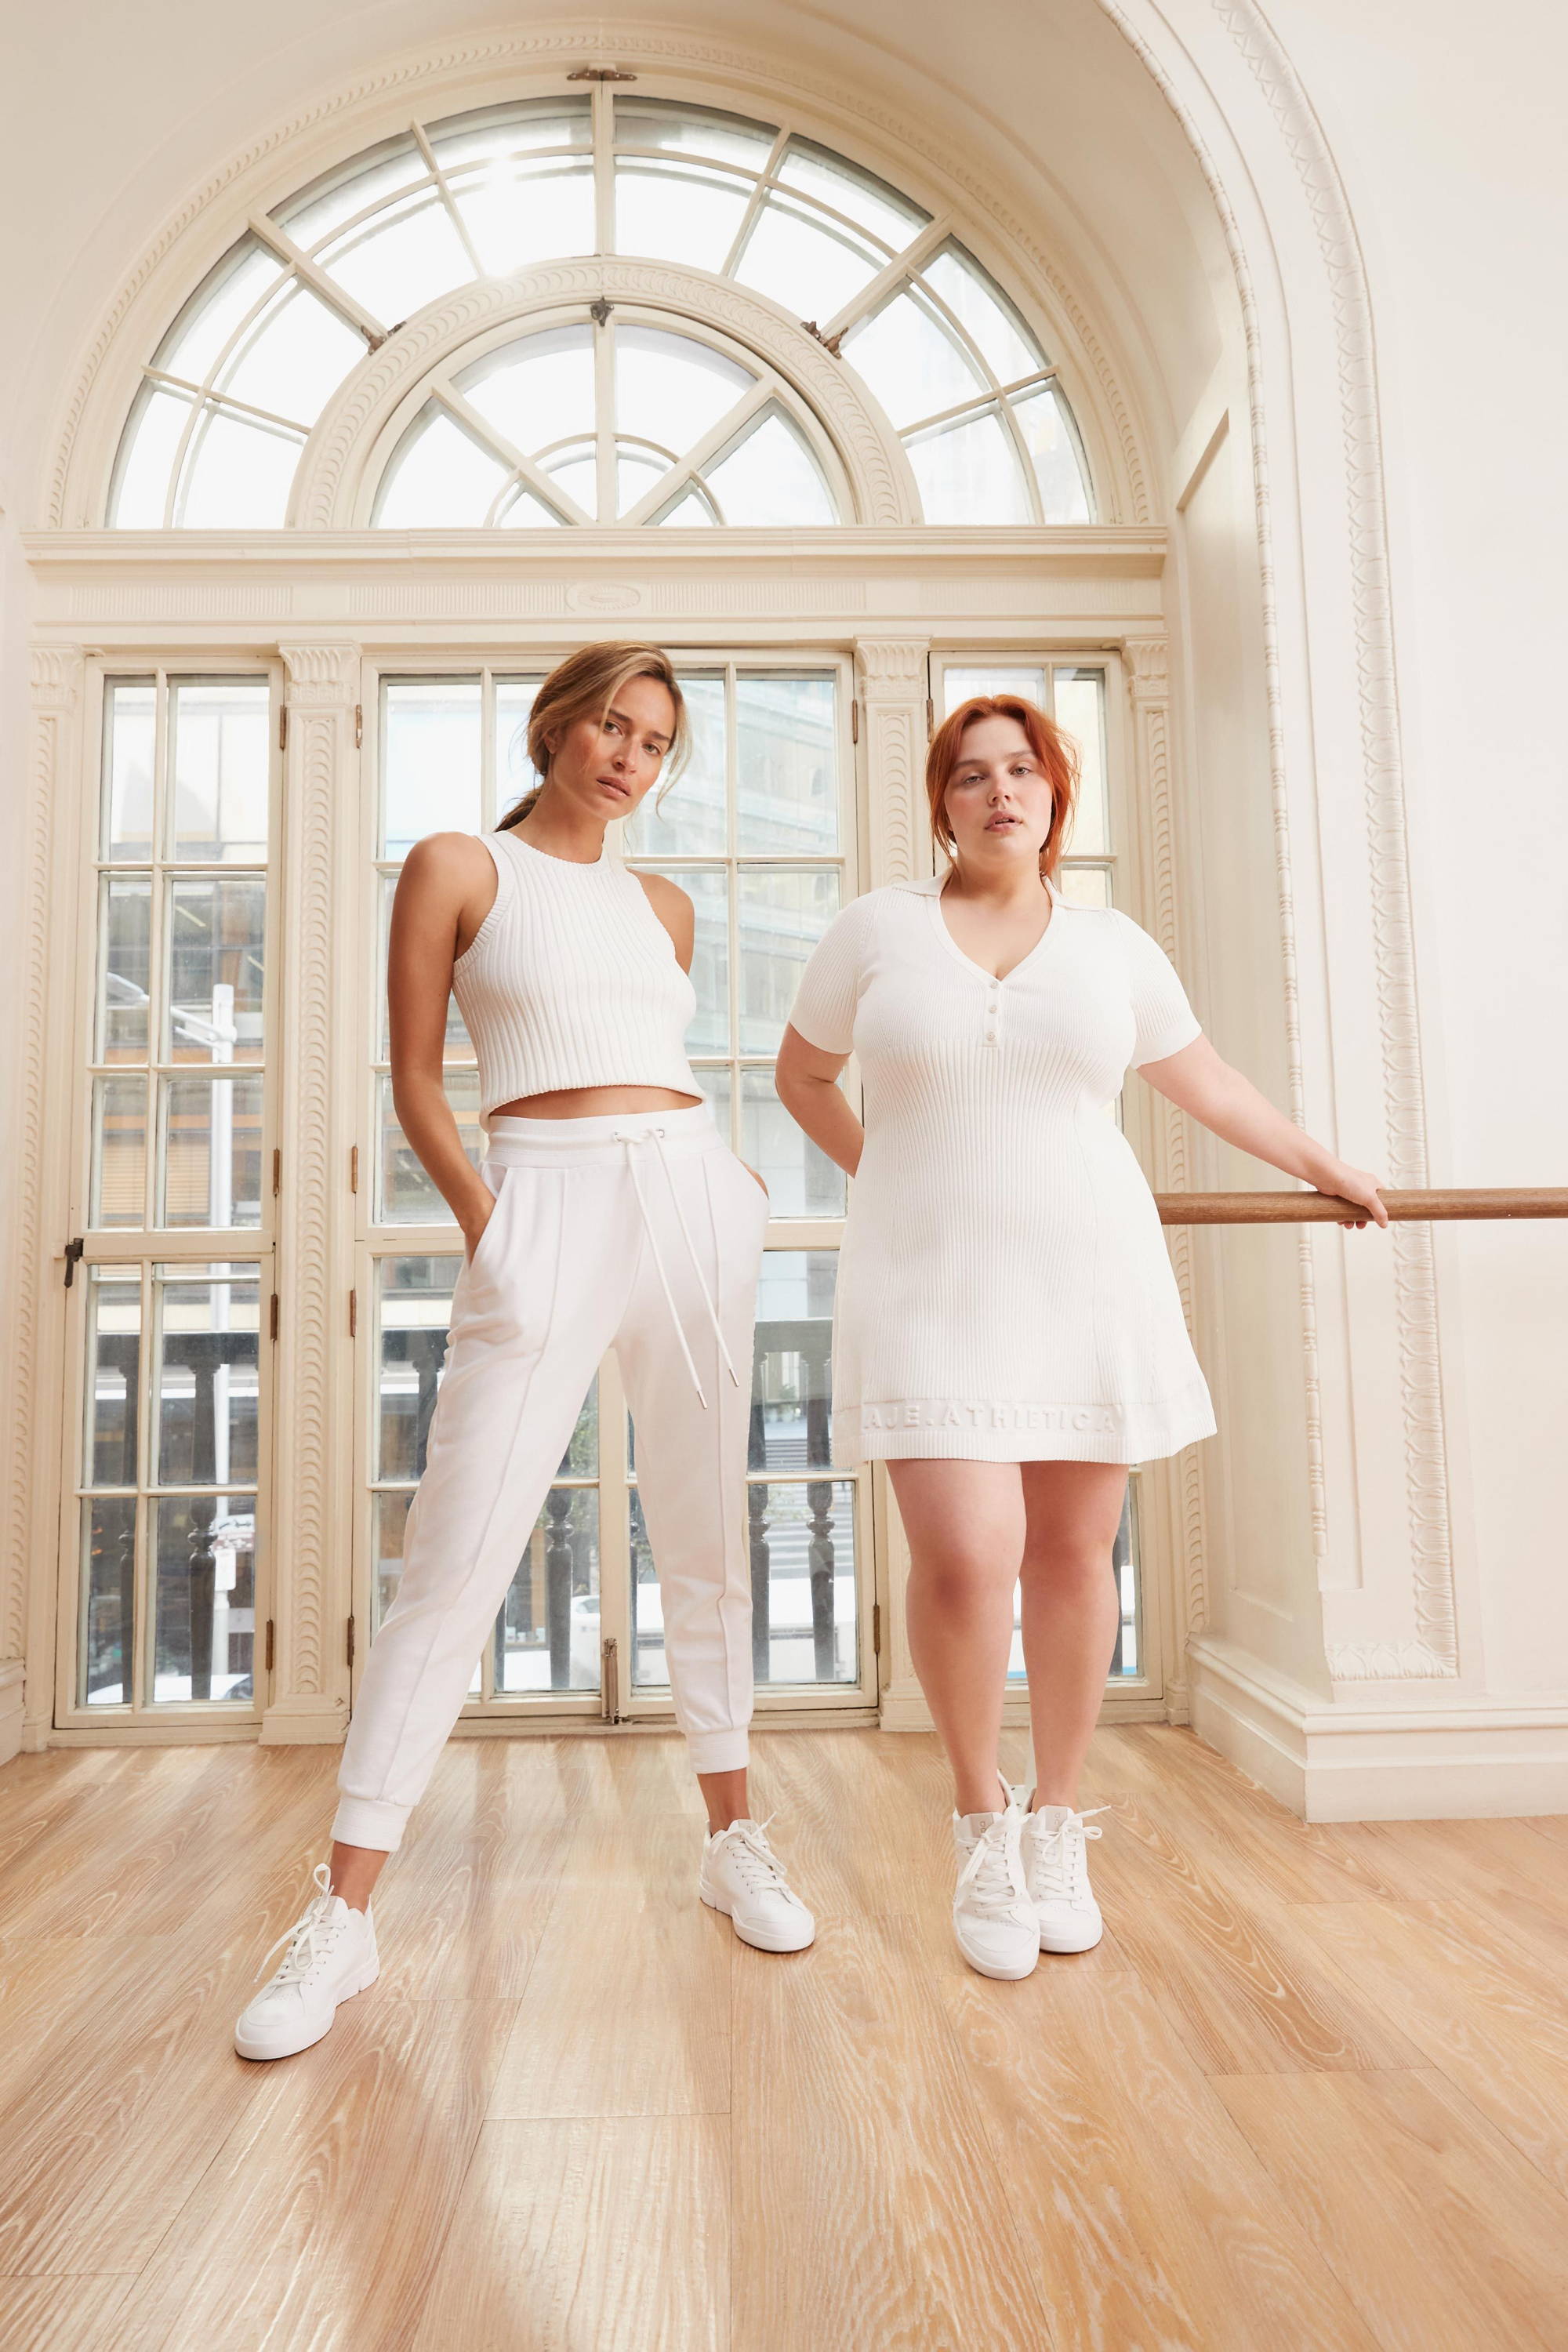 Tennis Whites I AJE ATHLETICA Collection 002 – AJE ATHLETICA ROW